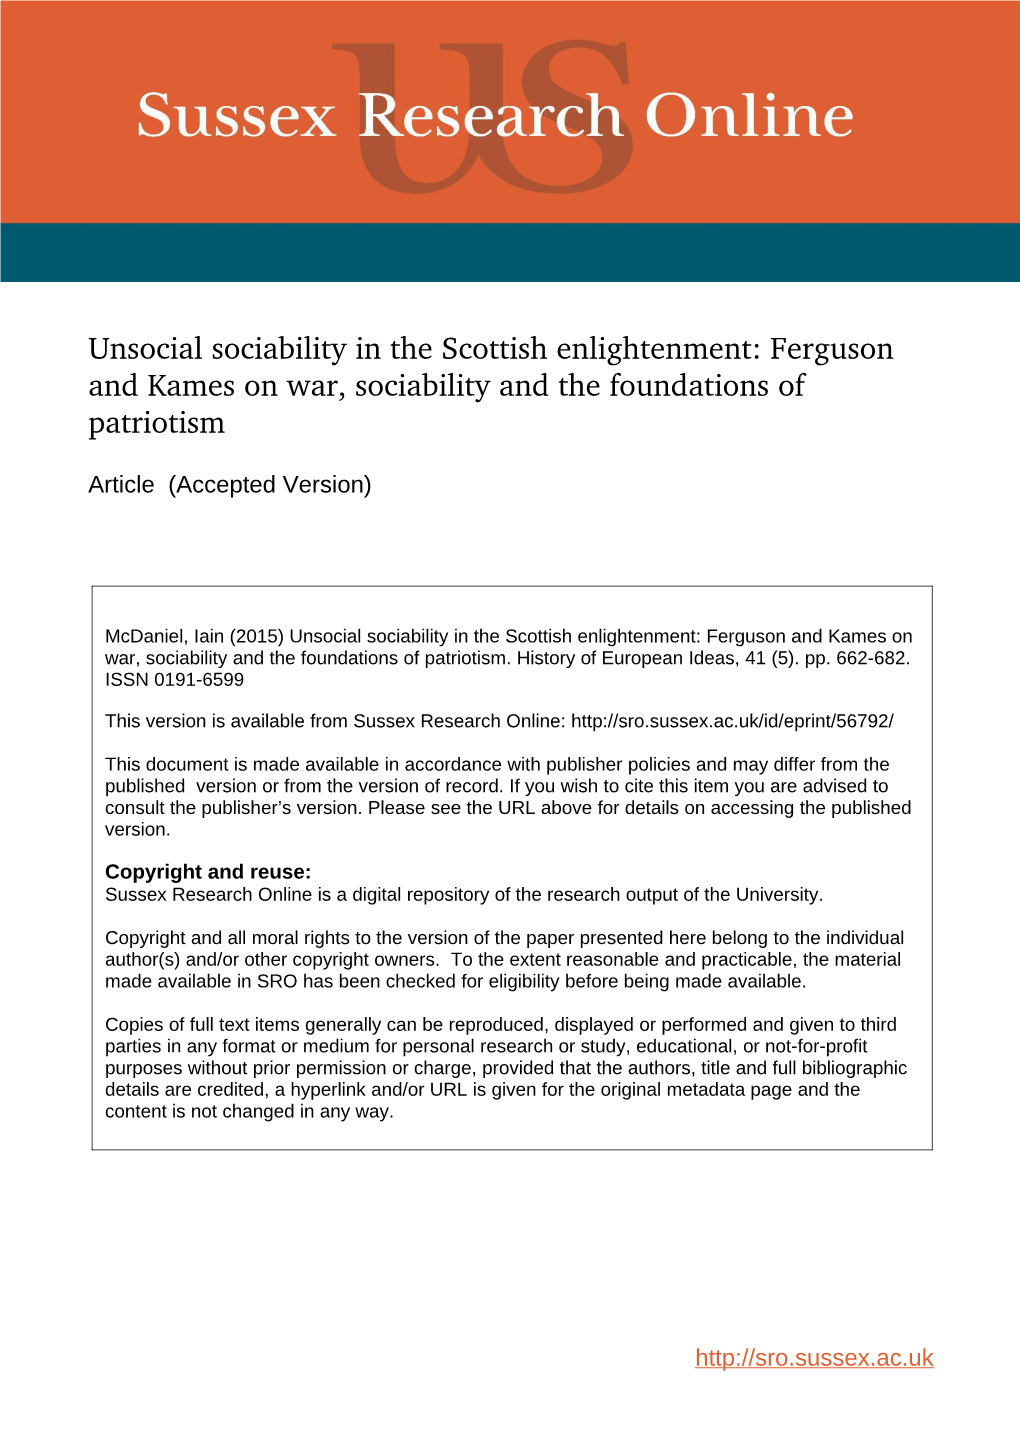 Unsocial Sociability in the Scottish Enlightenment: Ferguson and Kames on War, Sociability and the Foundations of Patriotism